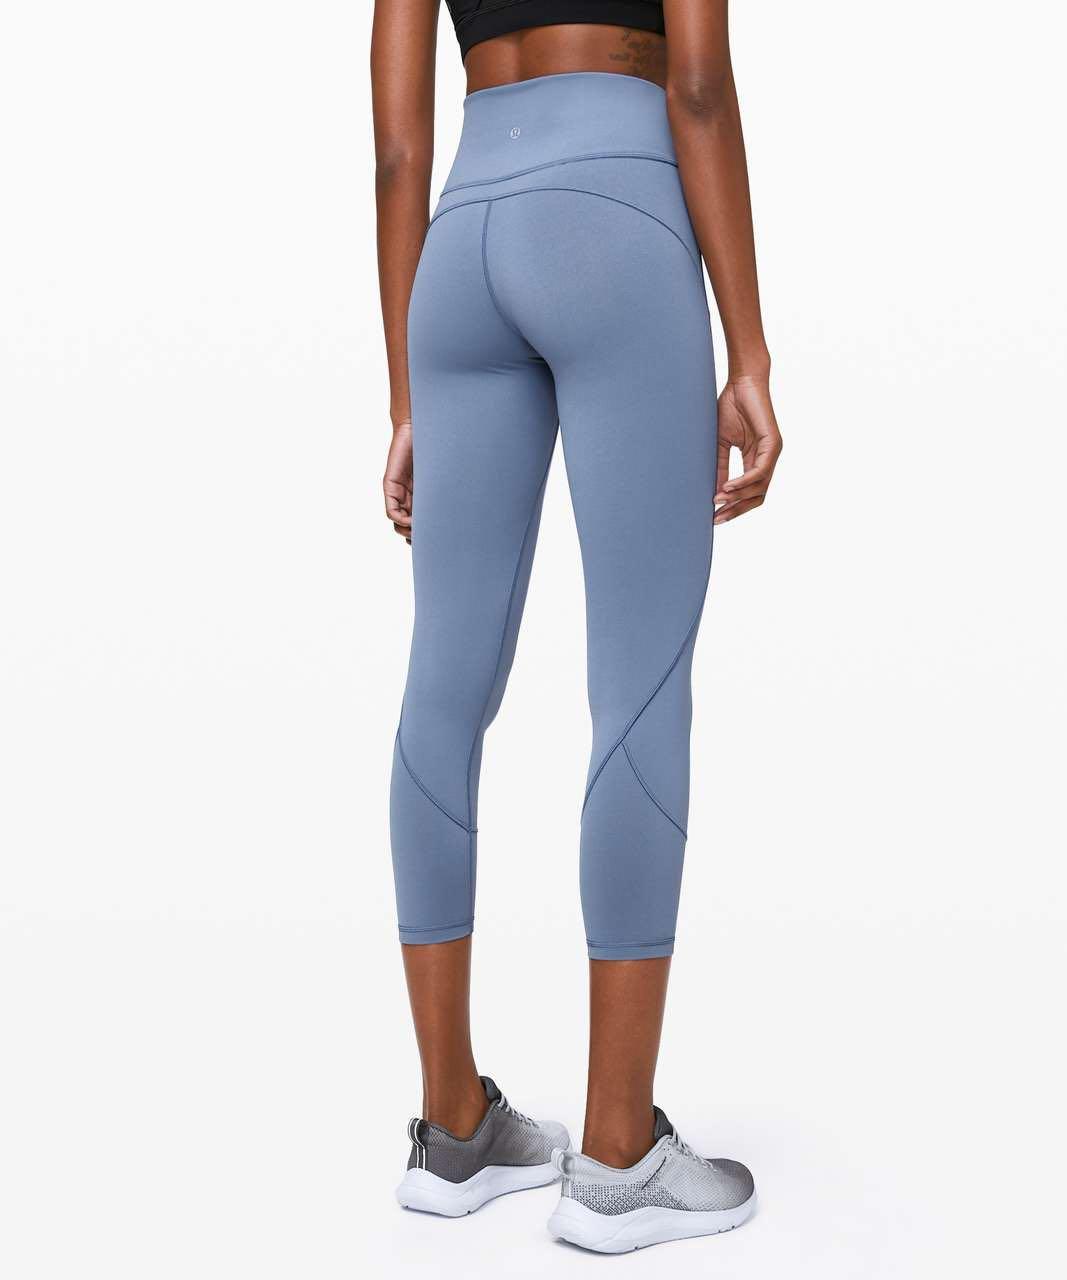 TRADE: Lululemon In Movement Tight 25 - Oasis Blue size 4